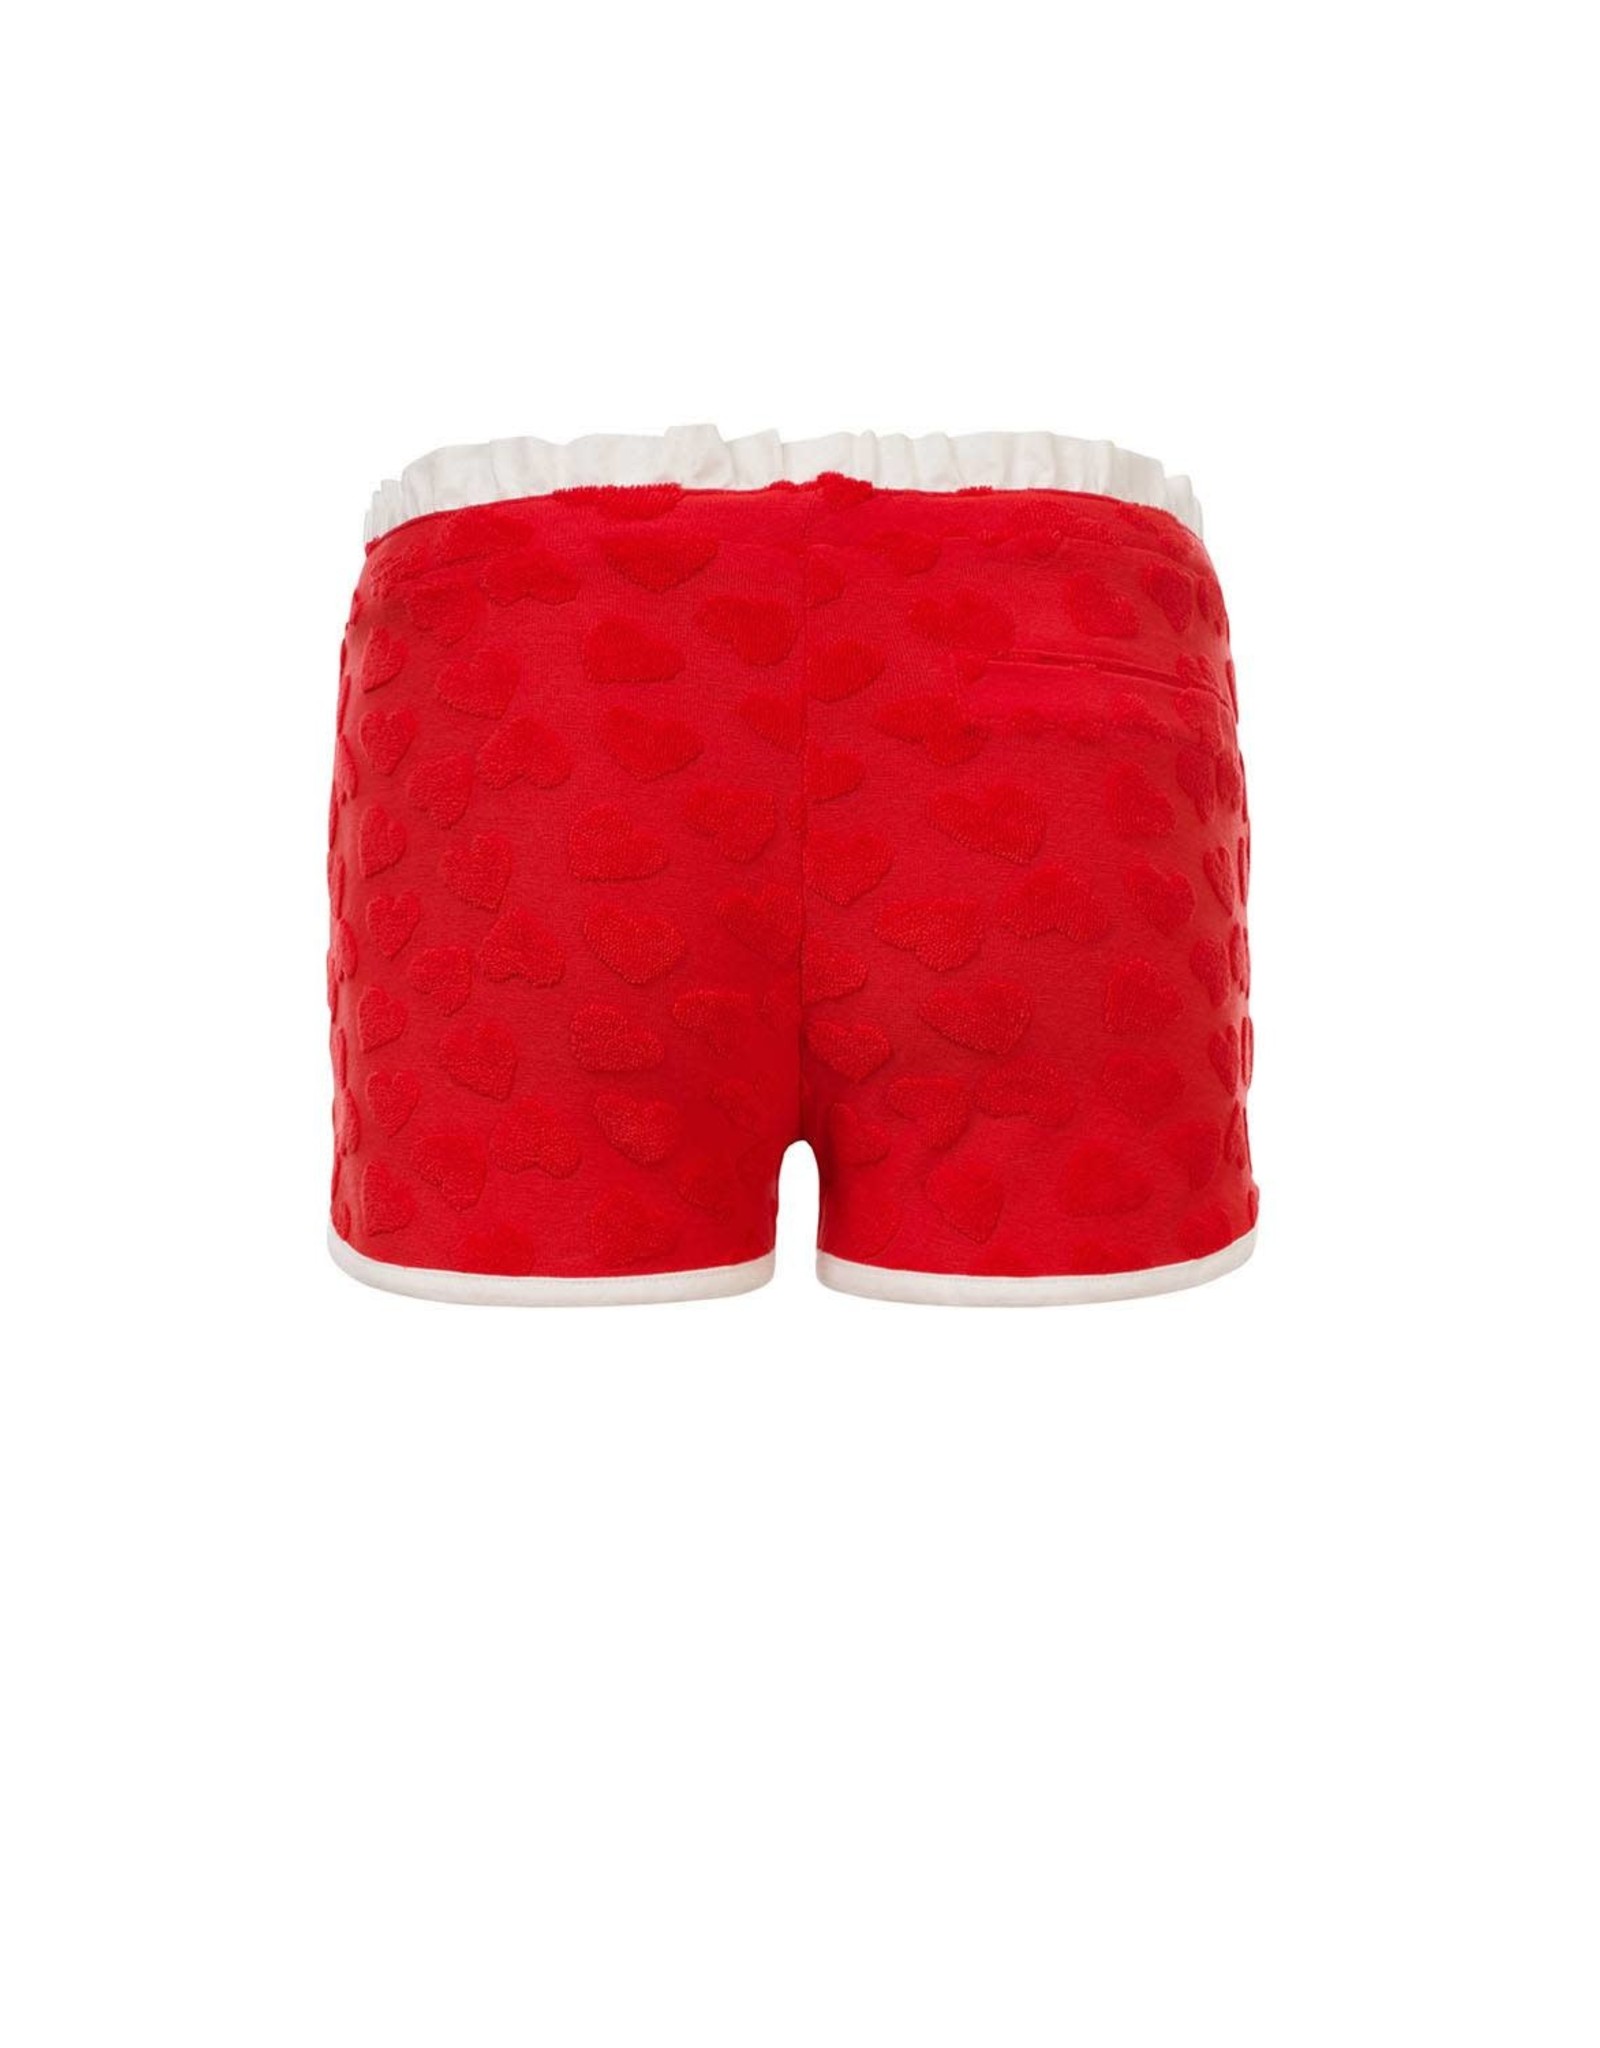 Looxs Little shorts RED APPLE